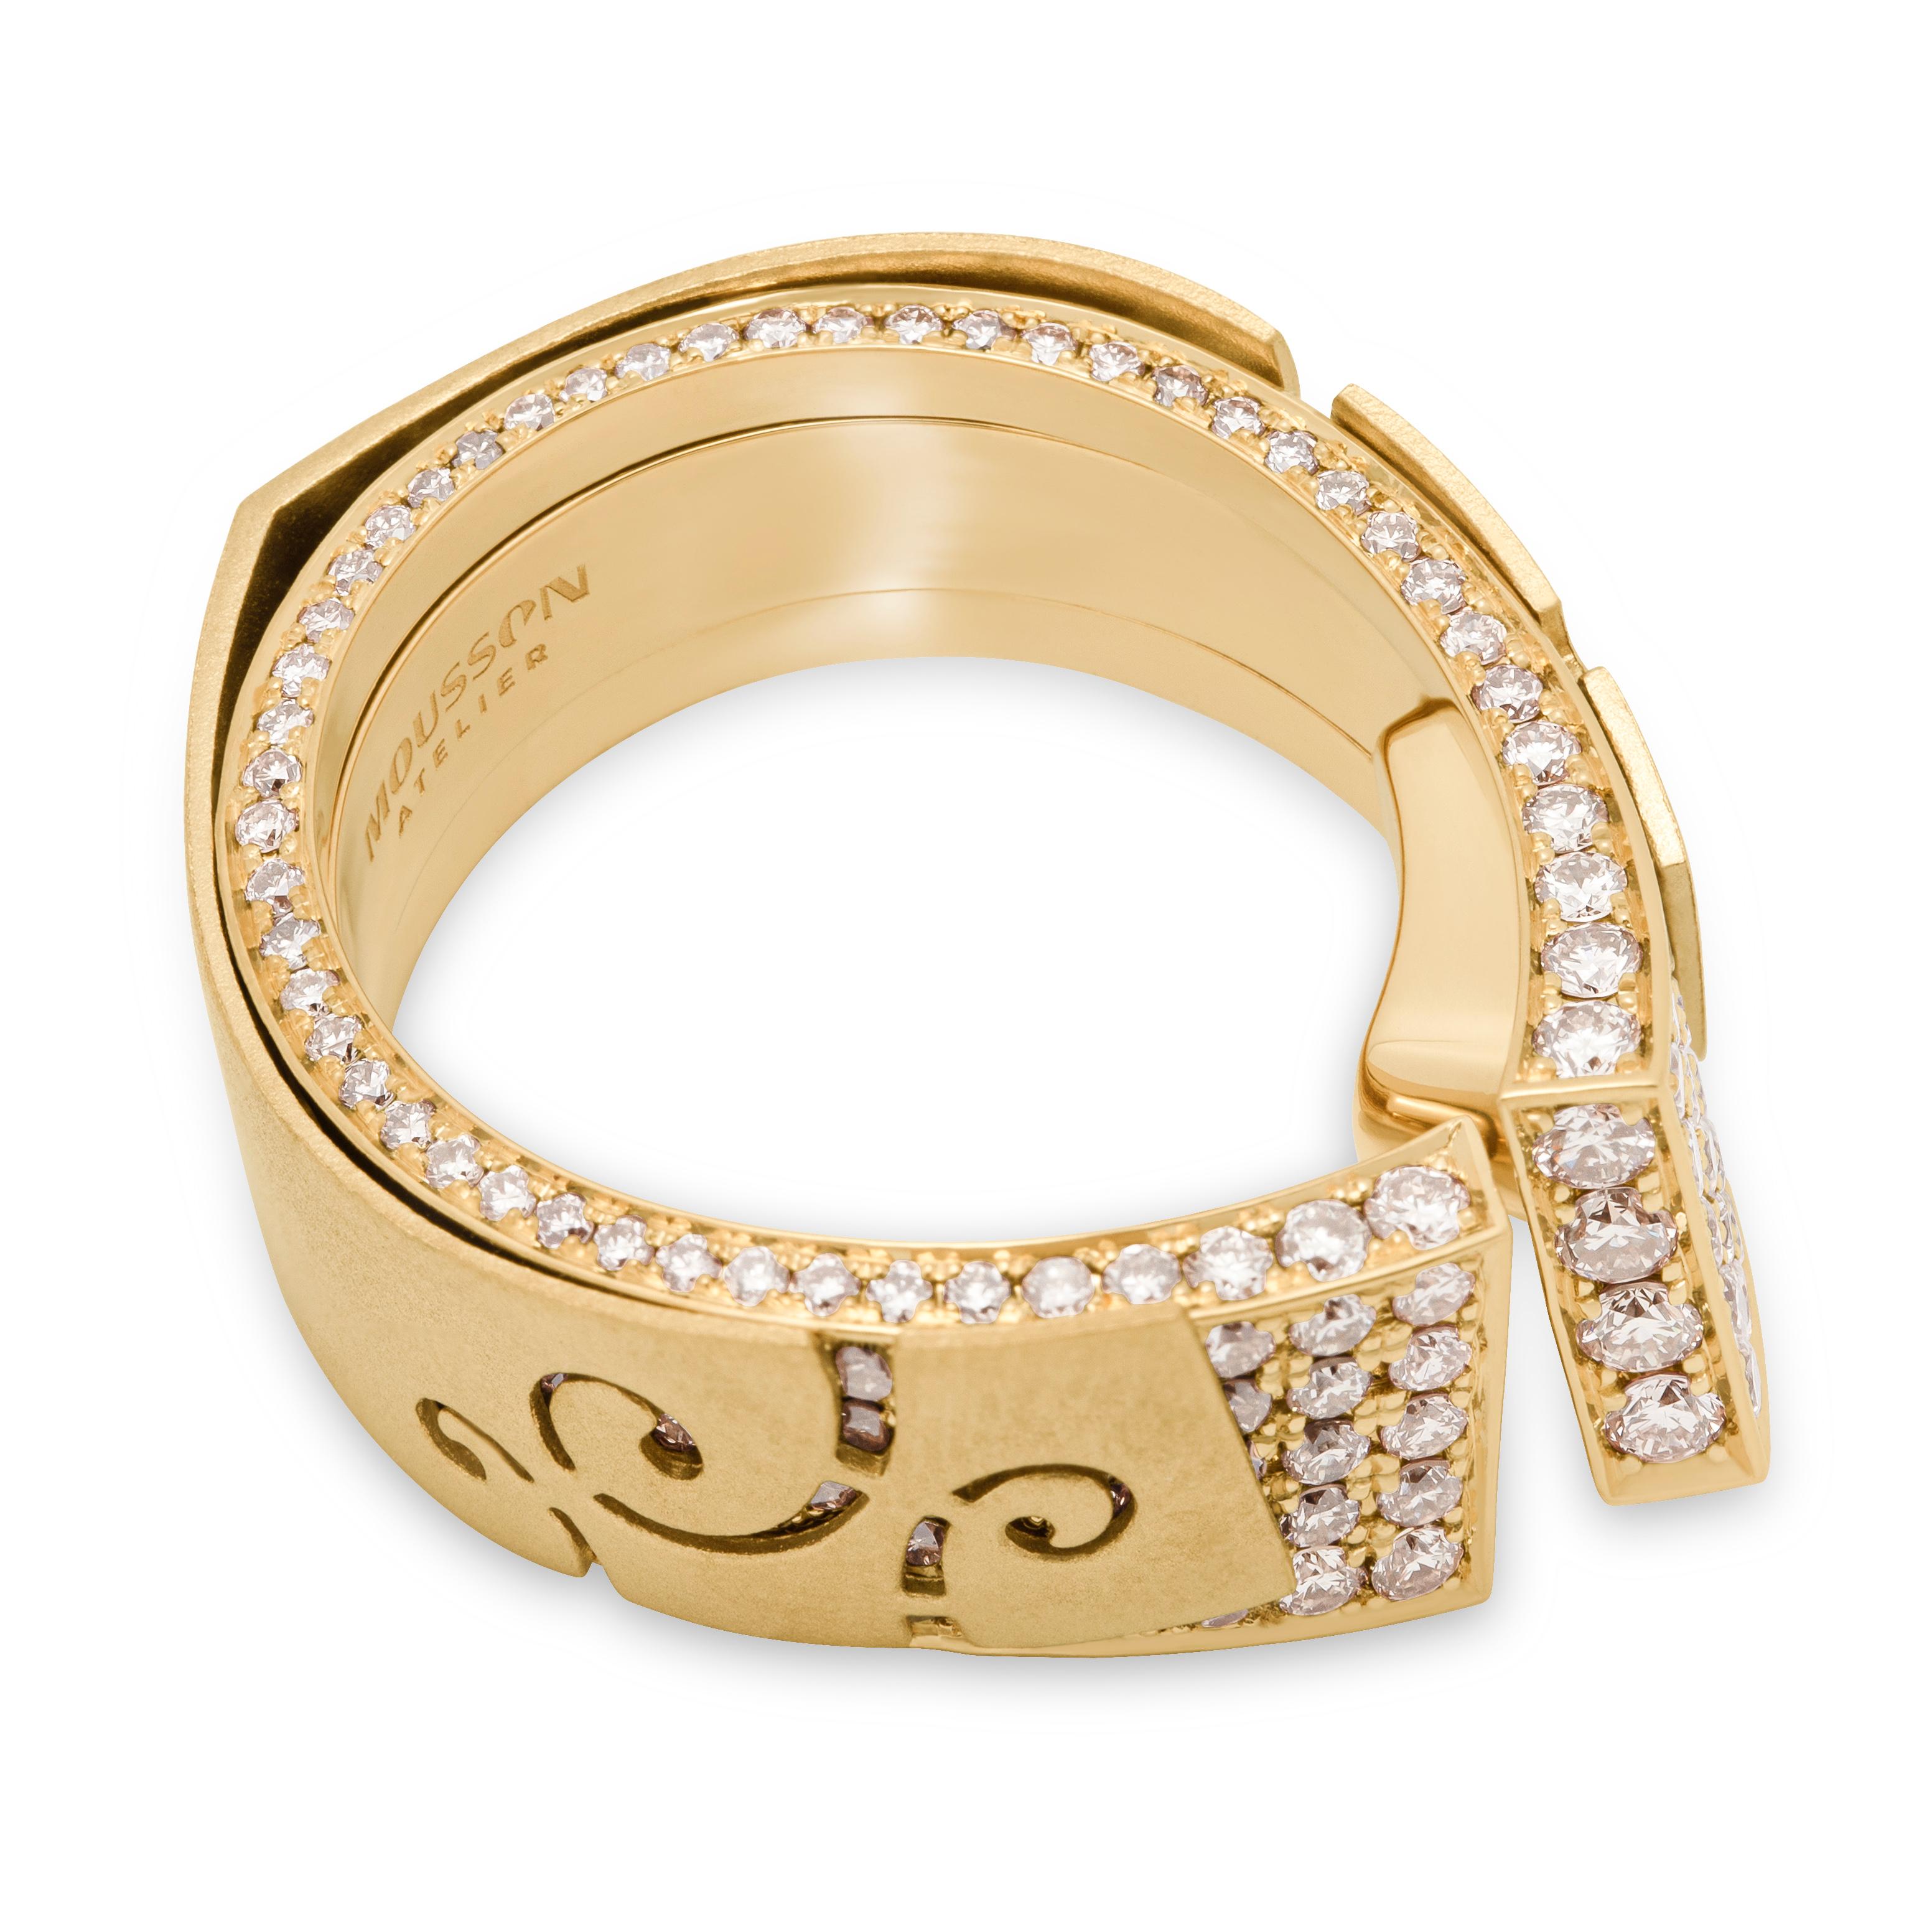 Champagne Diamonds 18 Karat Yellow Gold Veil Ring

Veil inspired this jewelry series by our designers. For example, this Ring seems to have two layers. The first layer is a 